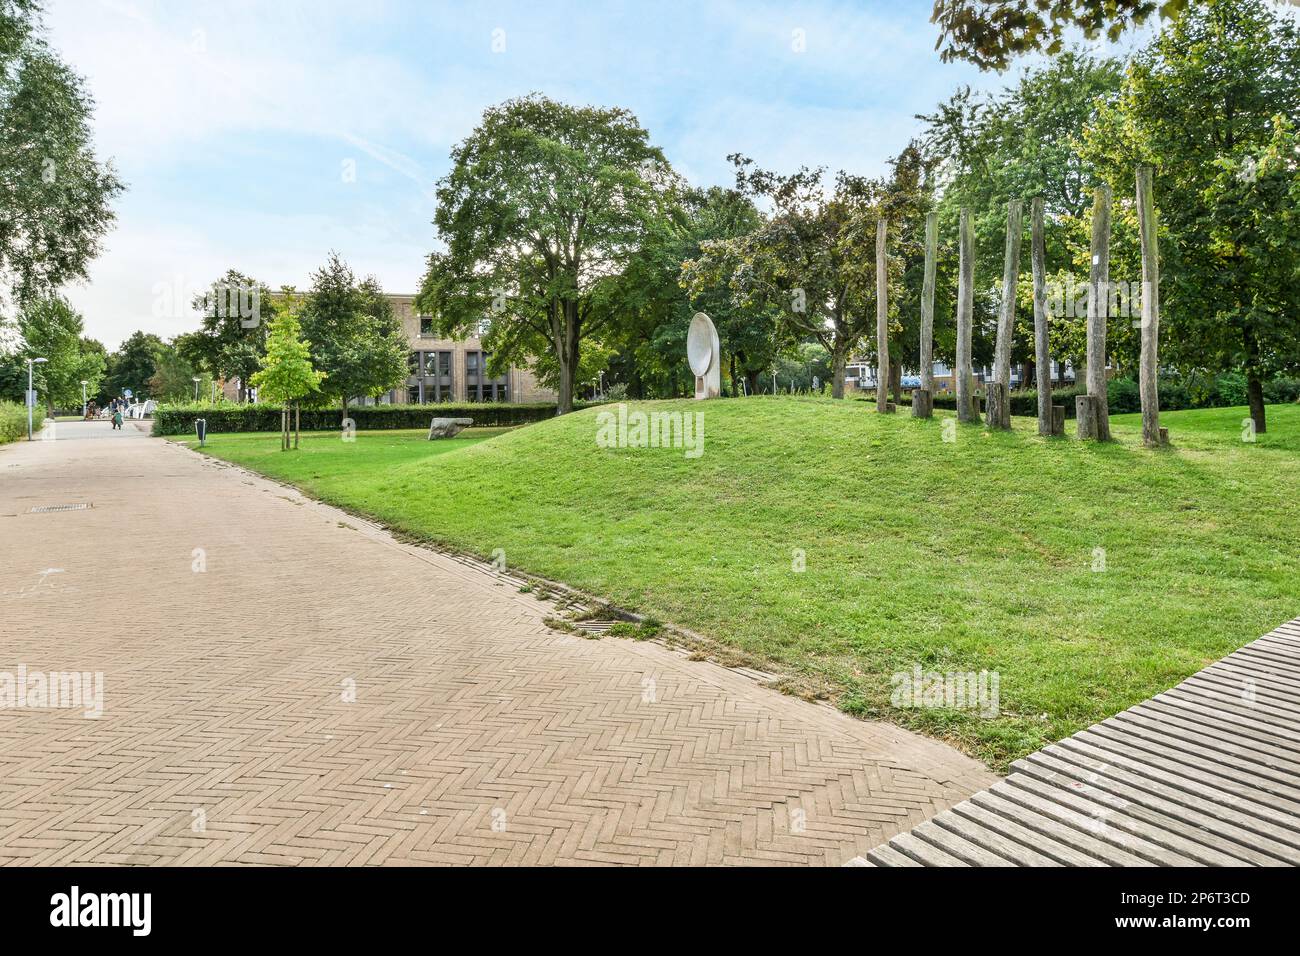 Amsterdam, Netherlands - 10 April, 2021: a park with some trees and grass on the ground in the background is a blue sky that has white clouds Stock Photo